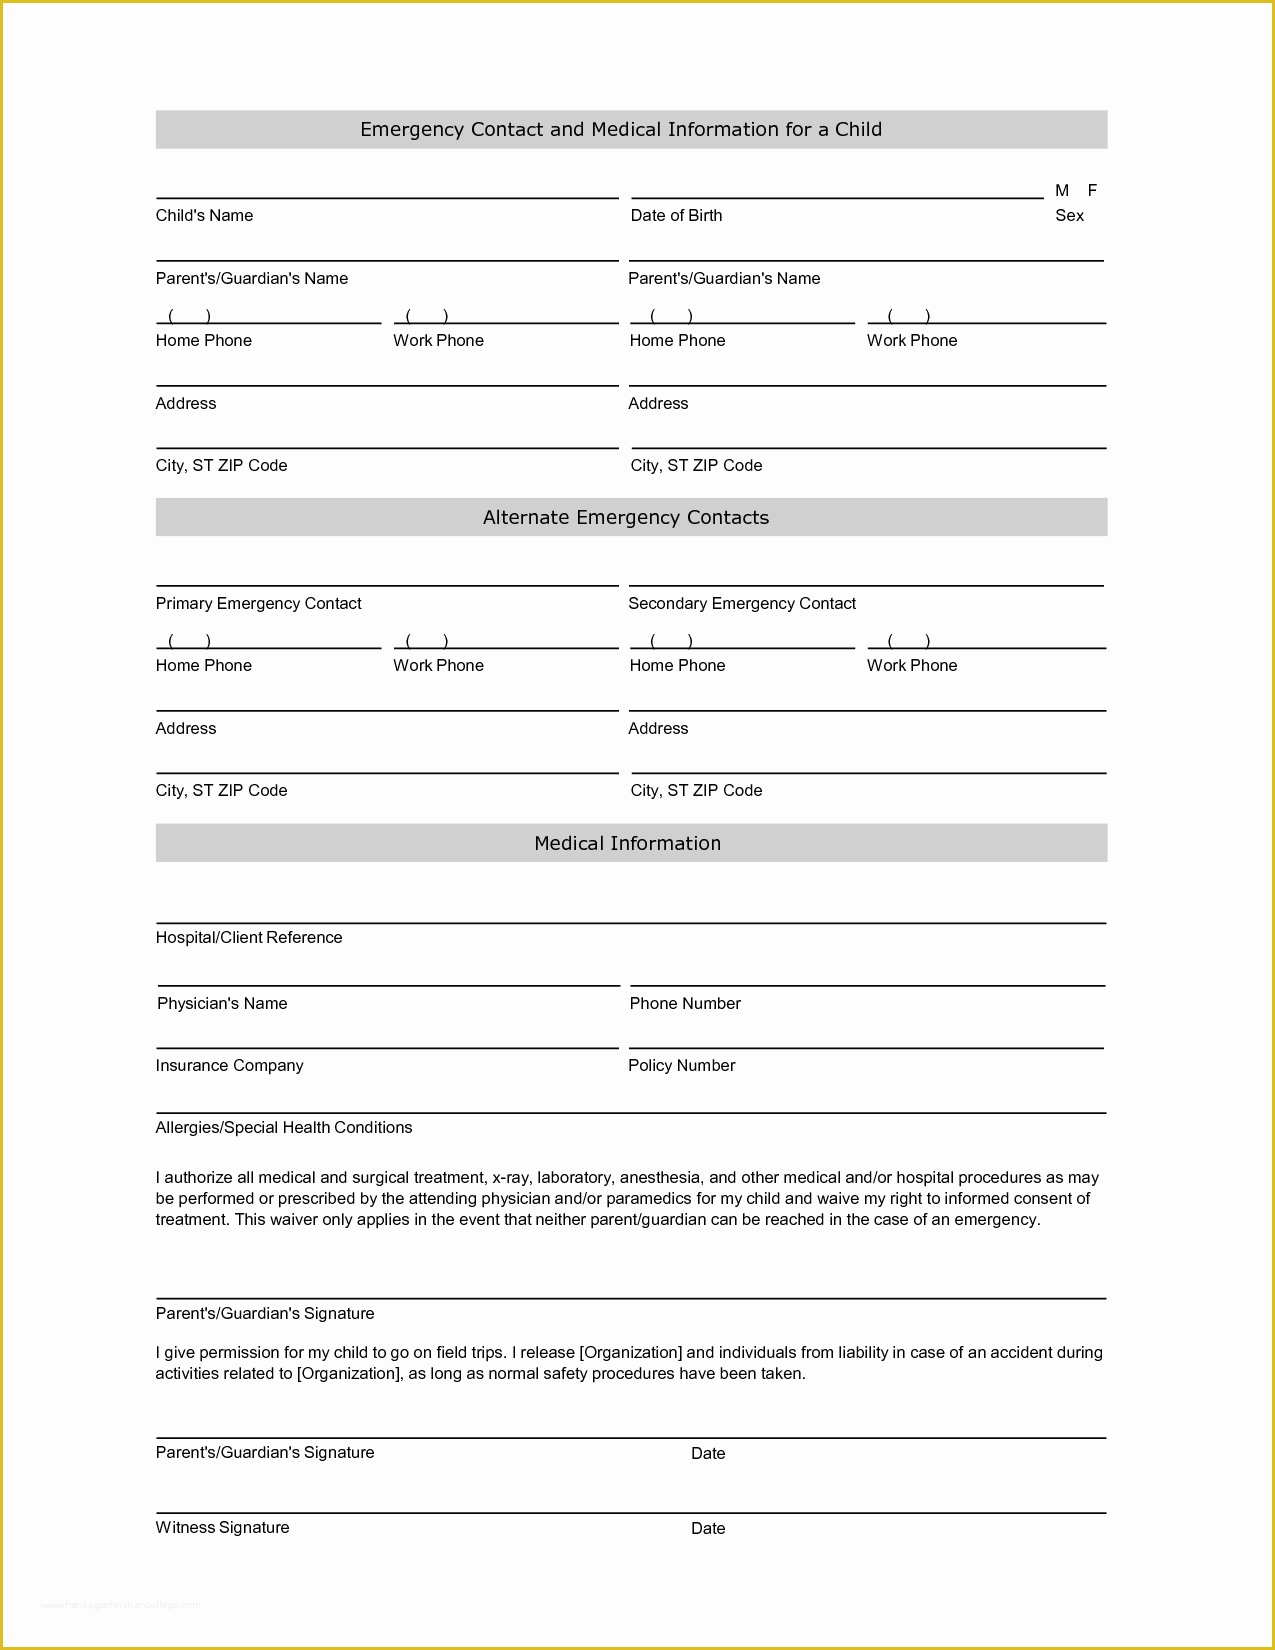 Free Contact Information Template Of Employee Emergency Contact Printable form to Pin